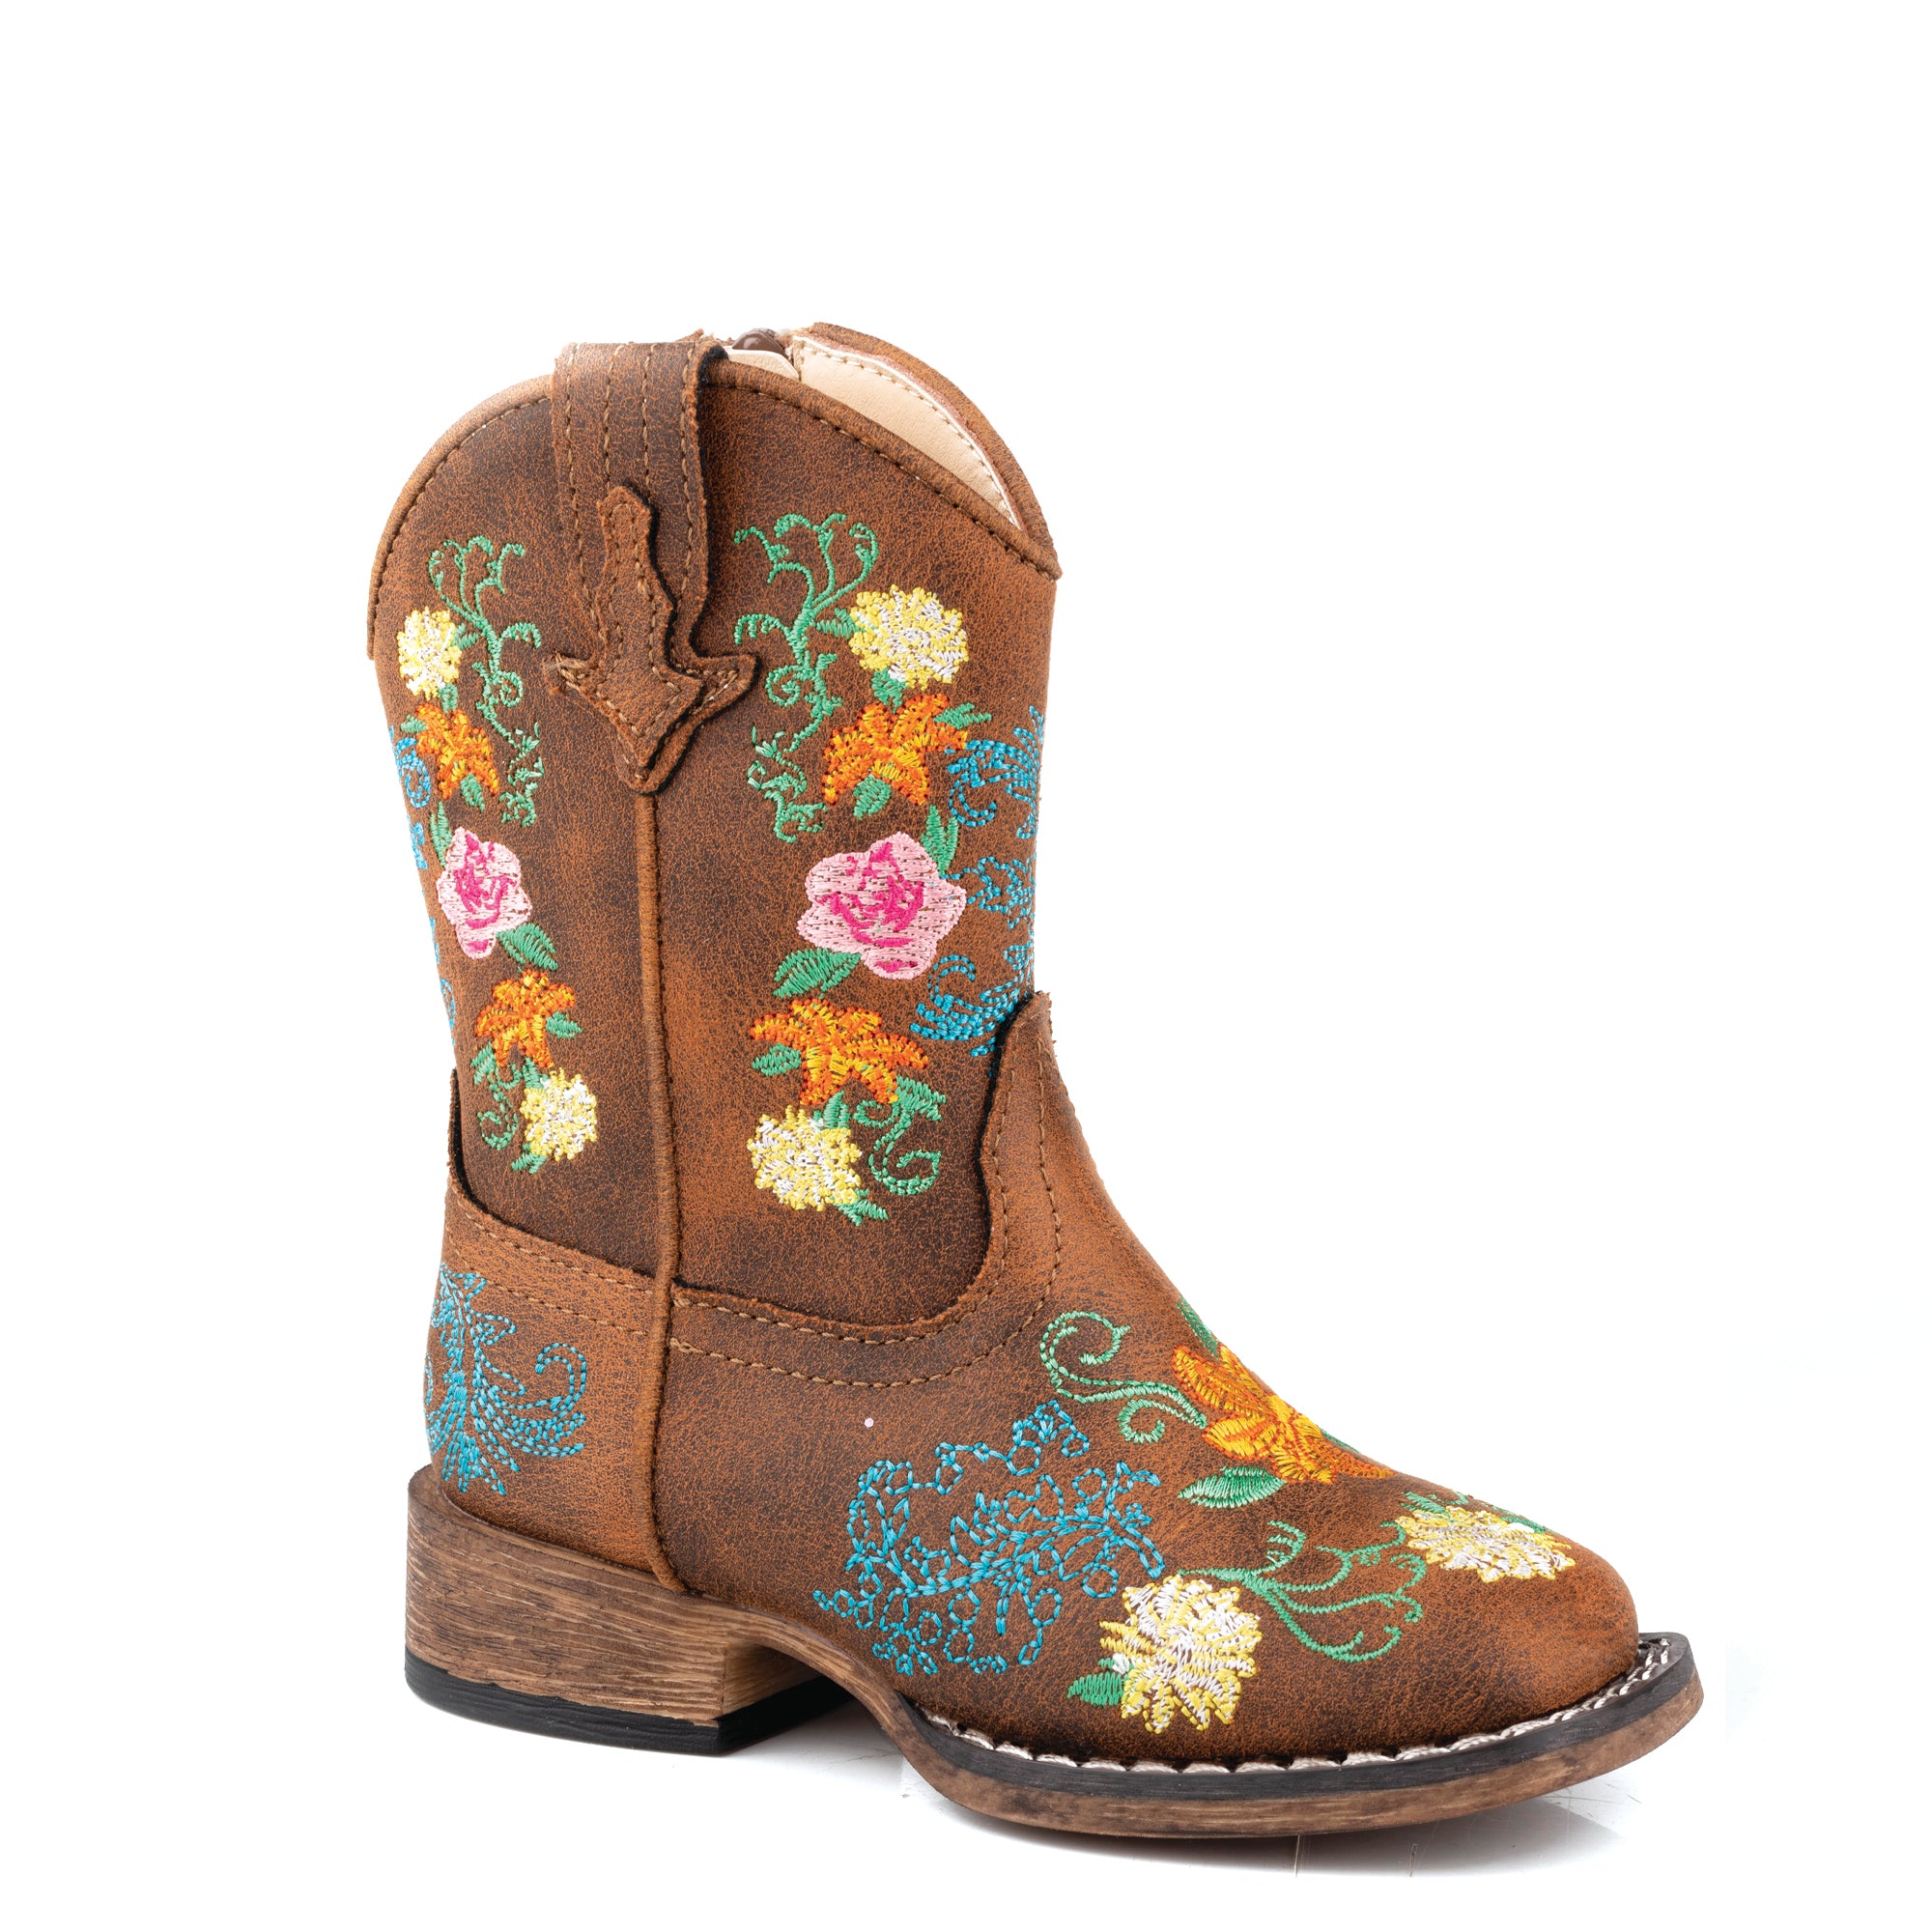 09-017-1903-3438 Roper Toddler Bailey Floral Boots Tan Embroidered